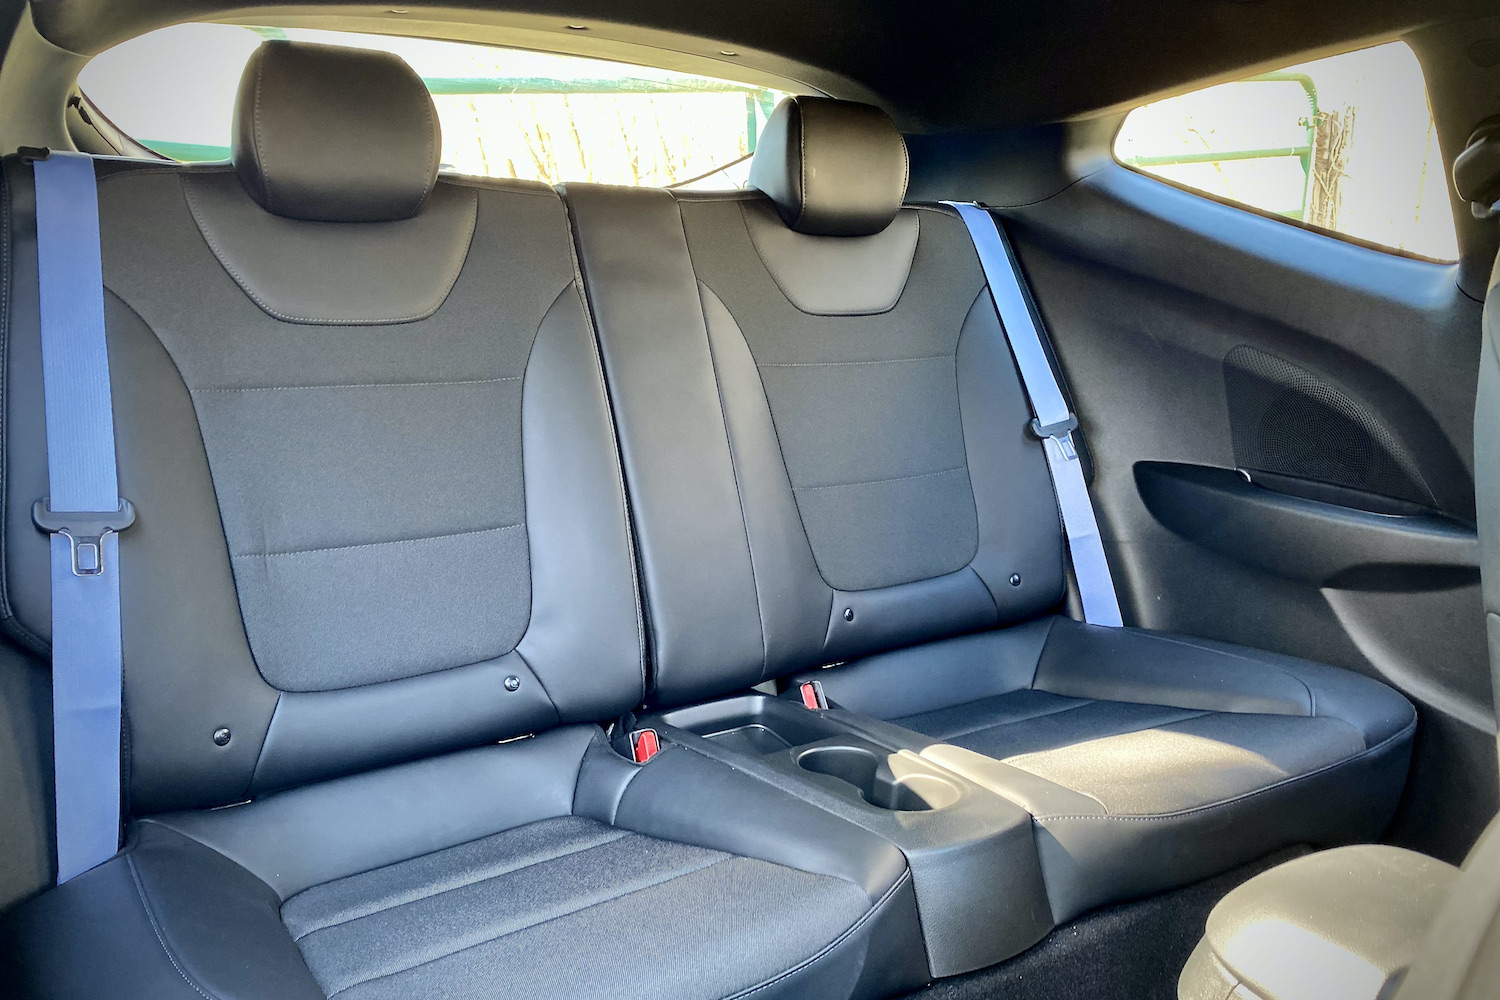 Hyundai Veloster N rear seats close up with blue seat belts.